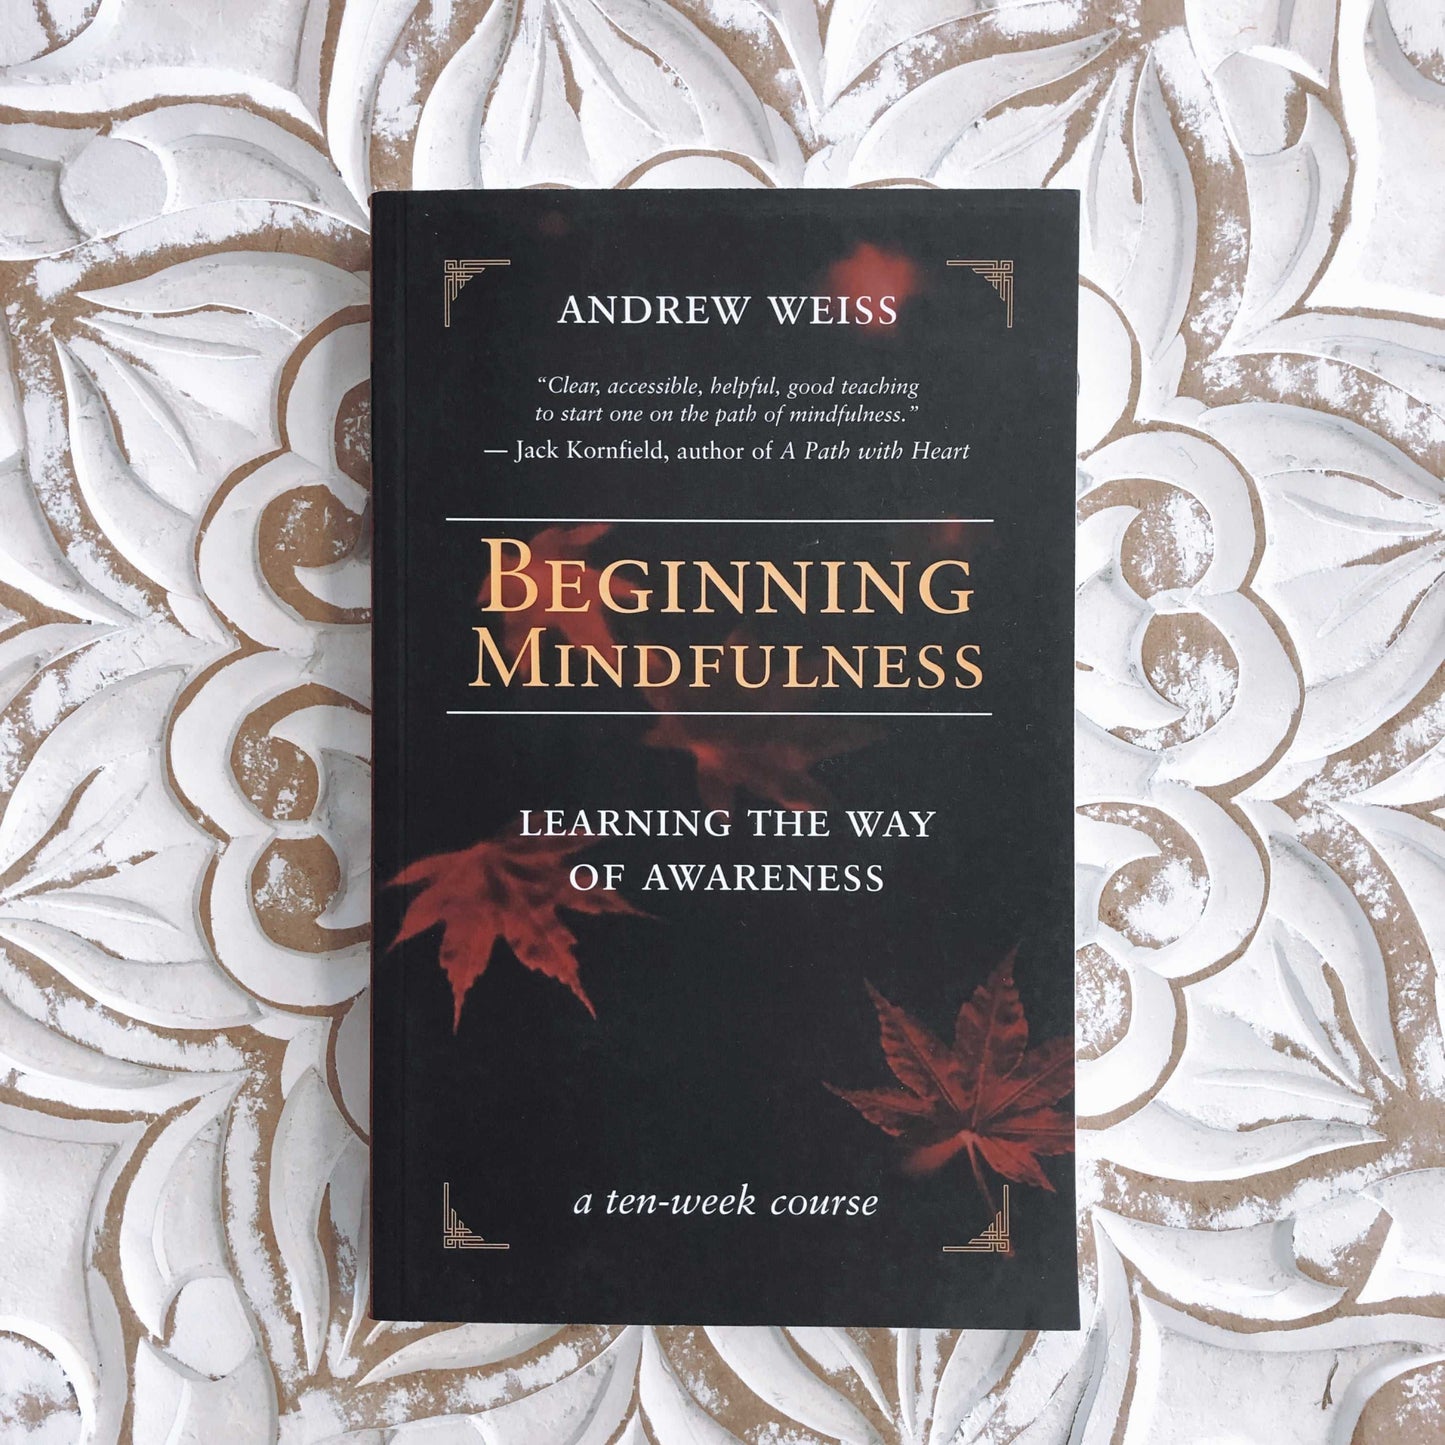 Beginning Mindfulness - Learning The Way Of Awareness